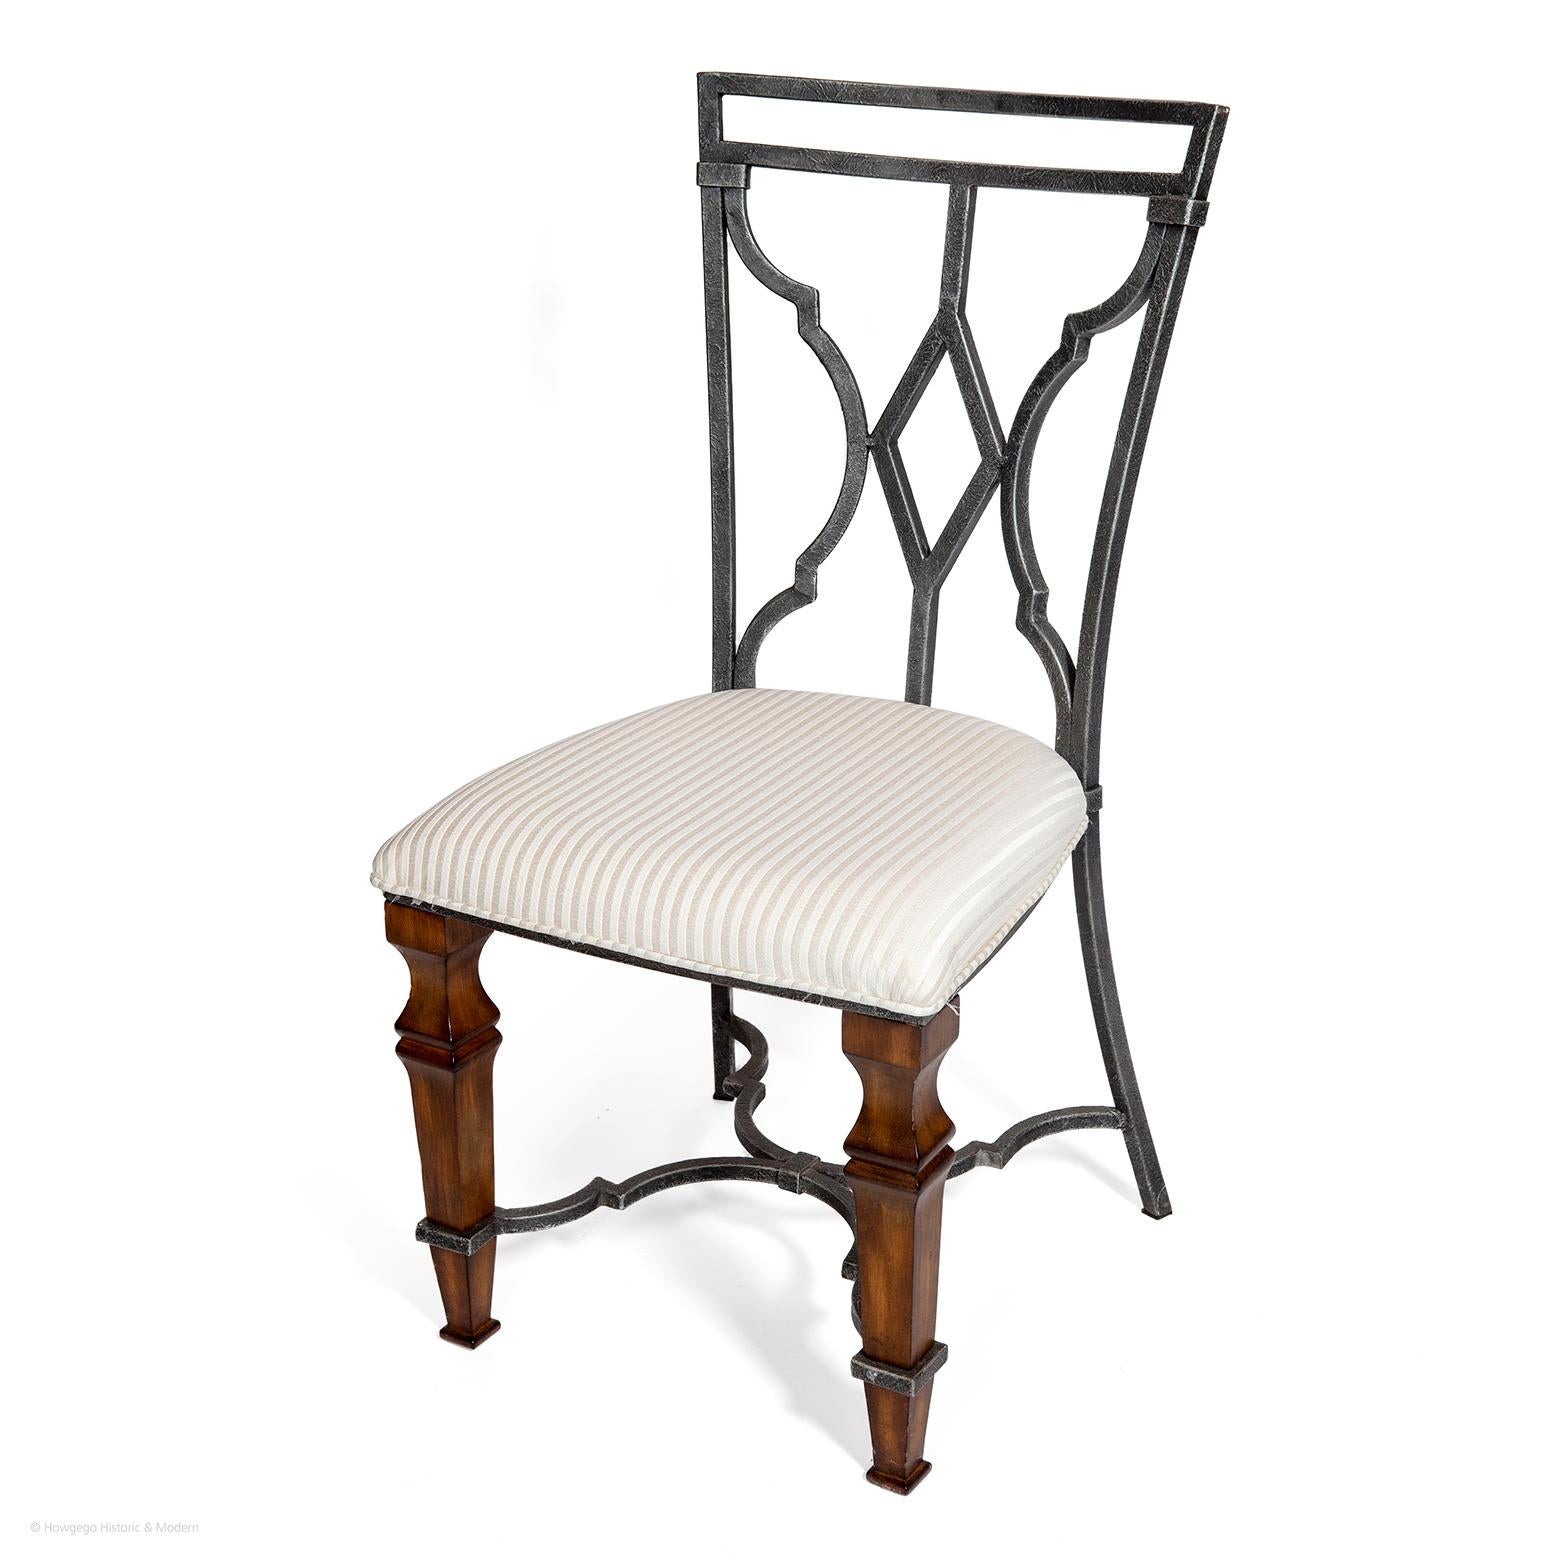 - Unusual set of chairs combining teak and metalwork upholstered in white striped textile
just purchased more information to follow and on request

Measures: Height (back) - 100cm 
Height (seat) - 49cm 
Depth - 46cm
Width - 55cm.